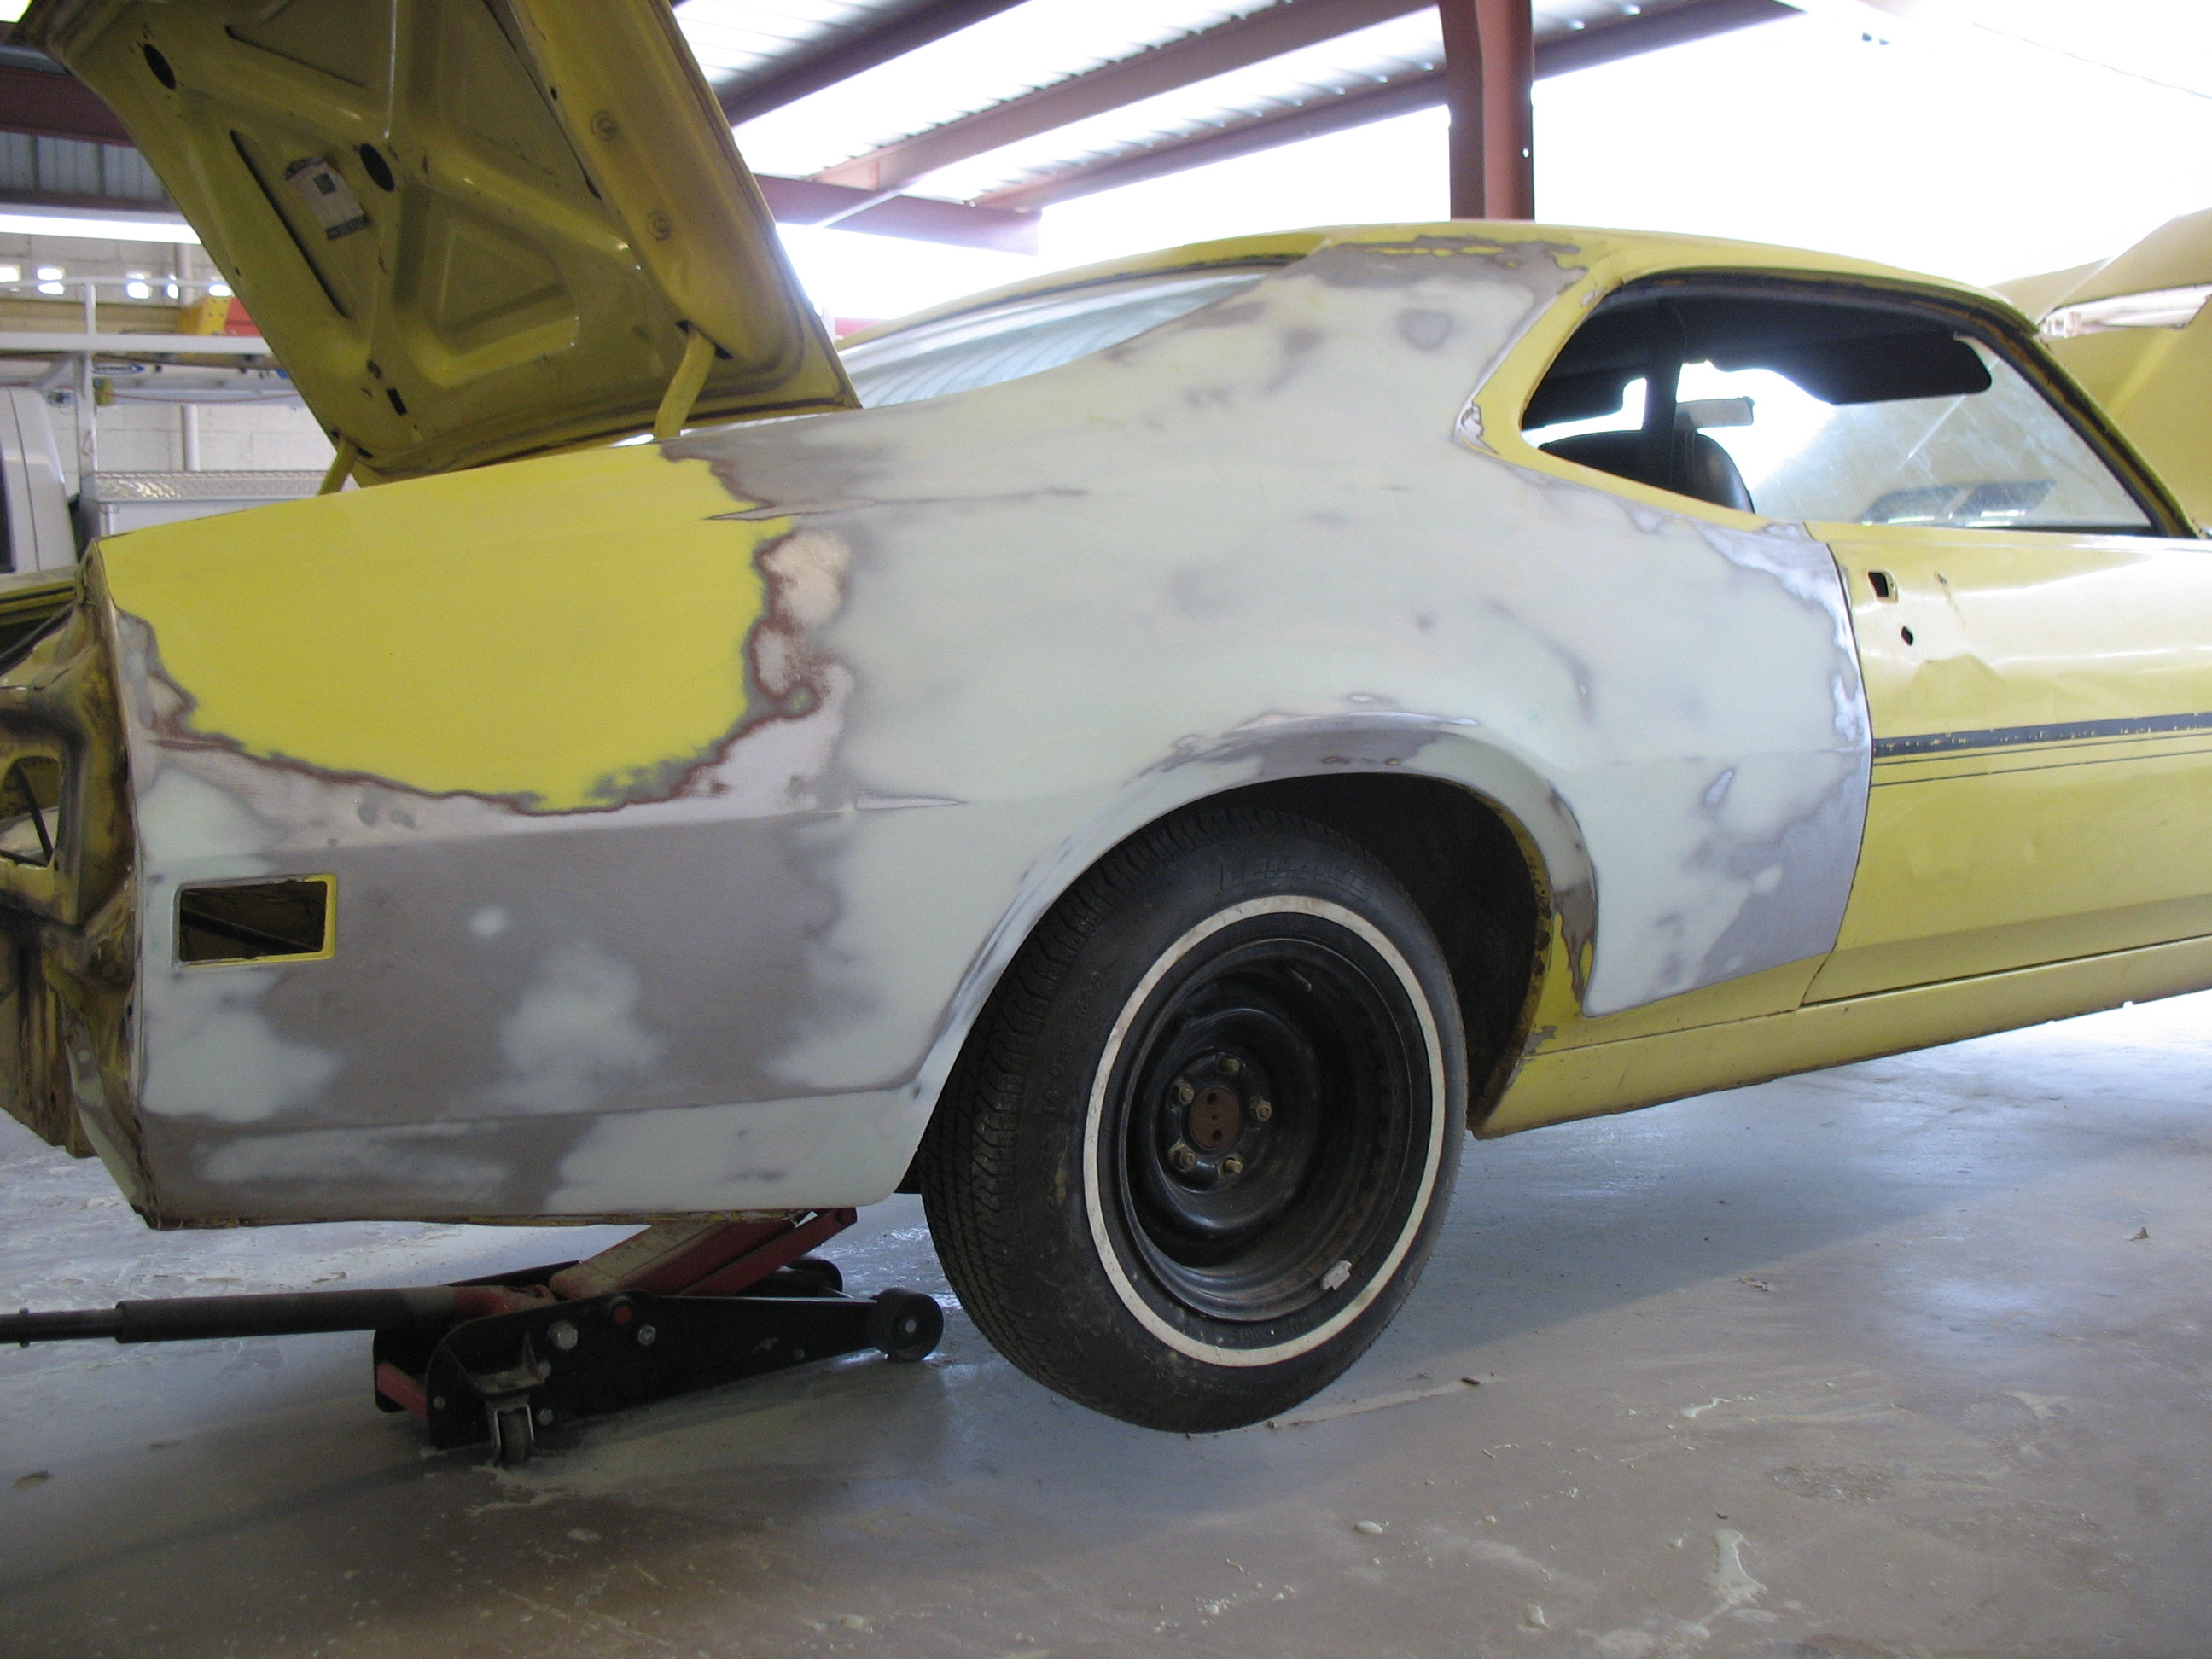 Mercury Cyclone, Restoring the Cyclone for a car-guy father, ClassicCars.com Journal